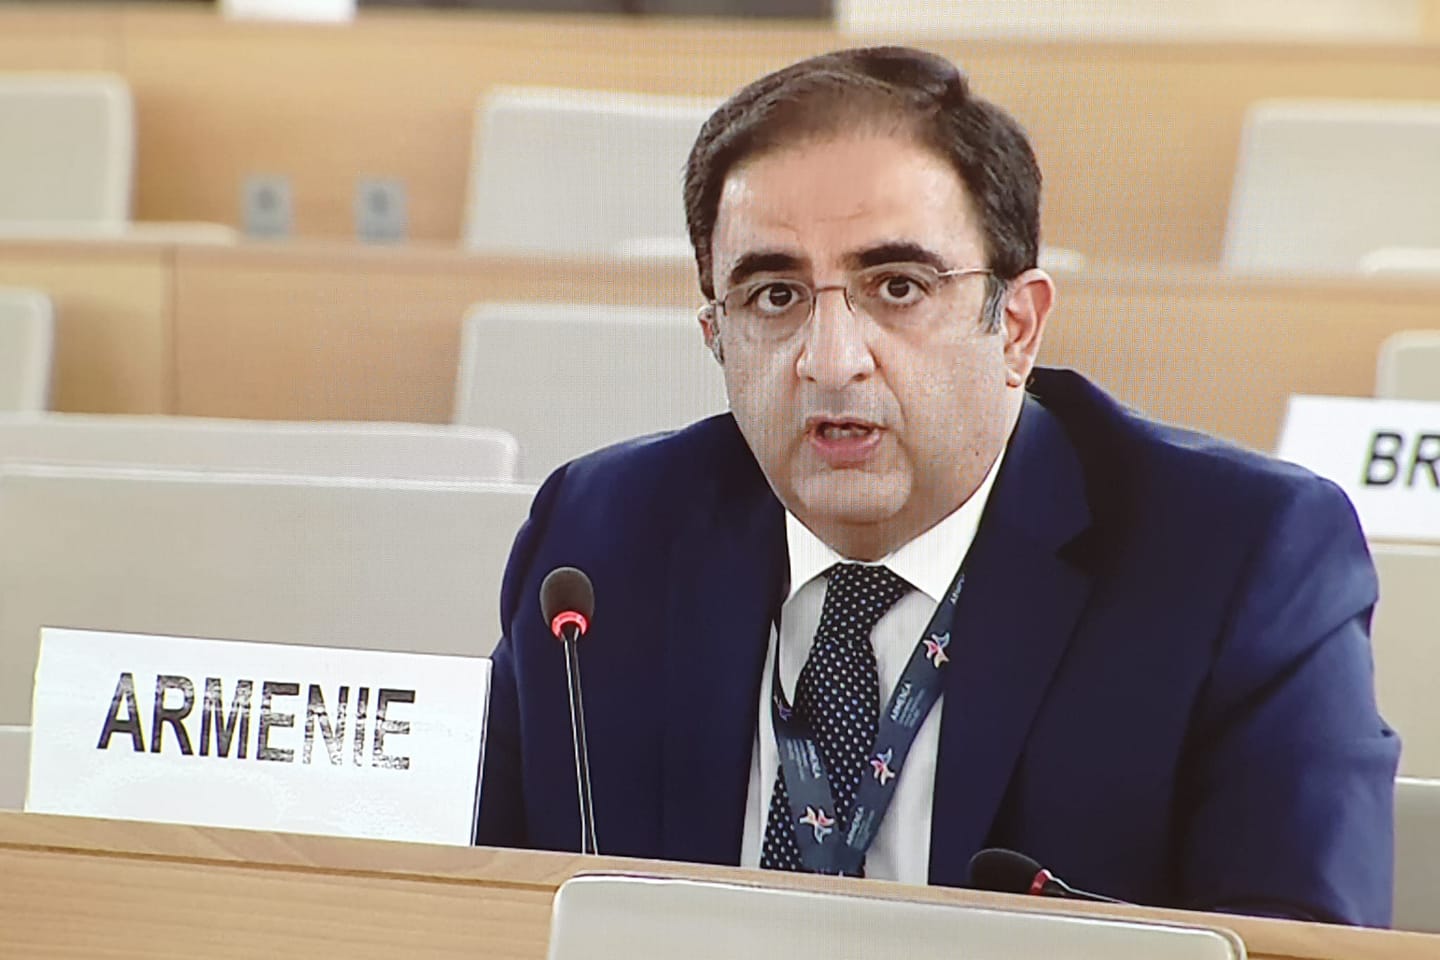 Azerbaijan resorts to human rights violations in the absence of clear international reaction – Amb. Hovhannisyan